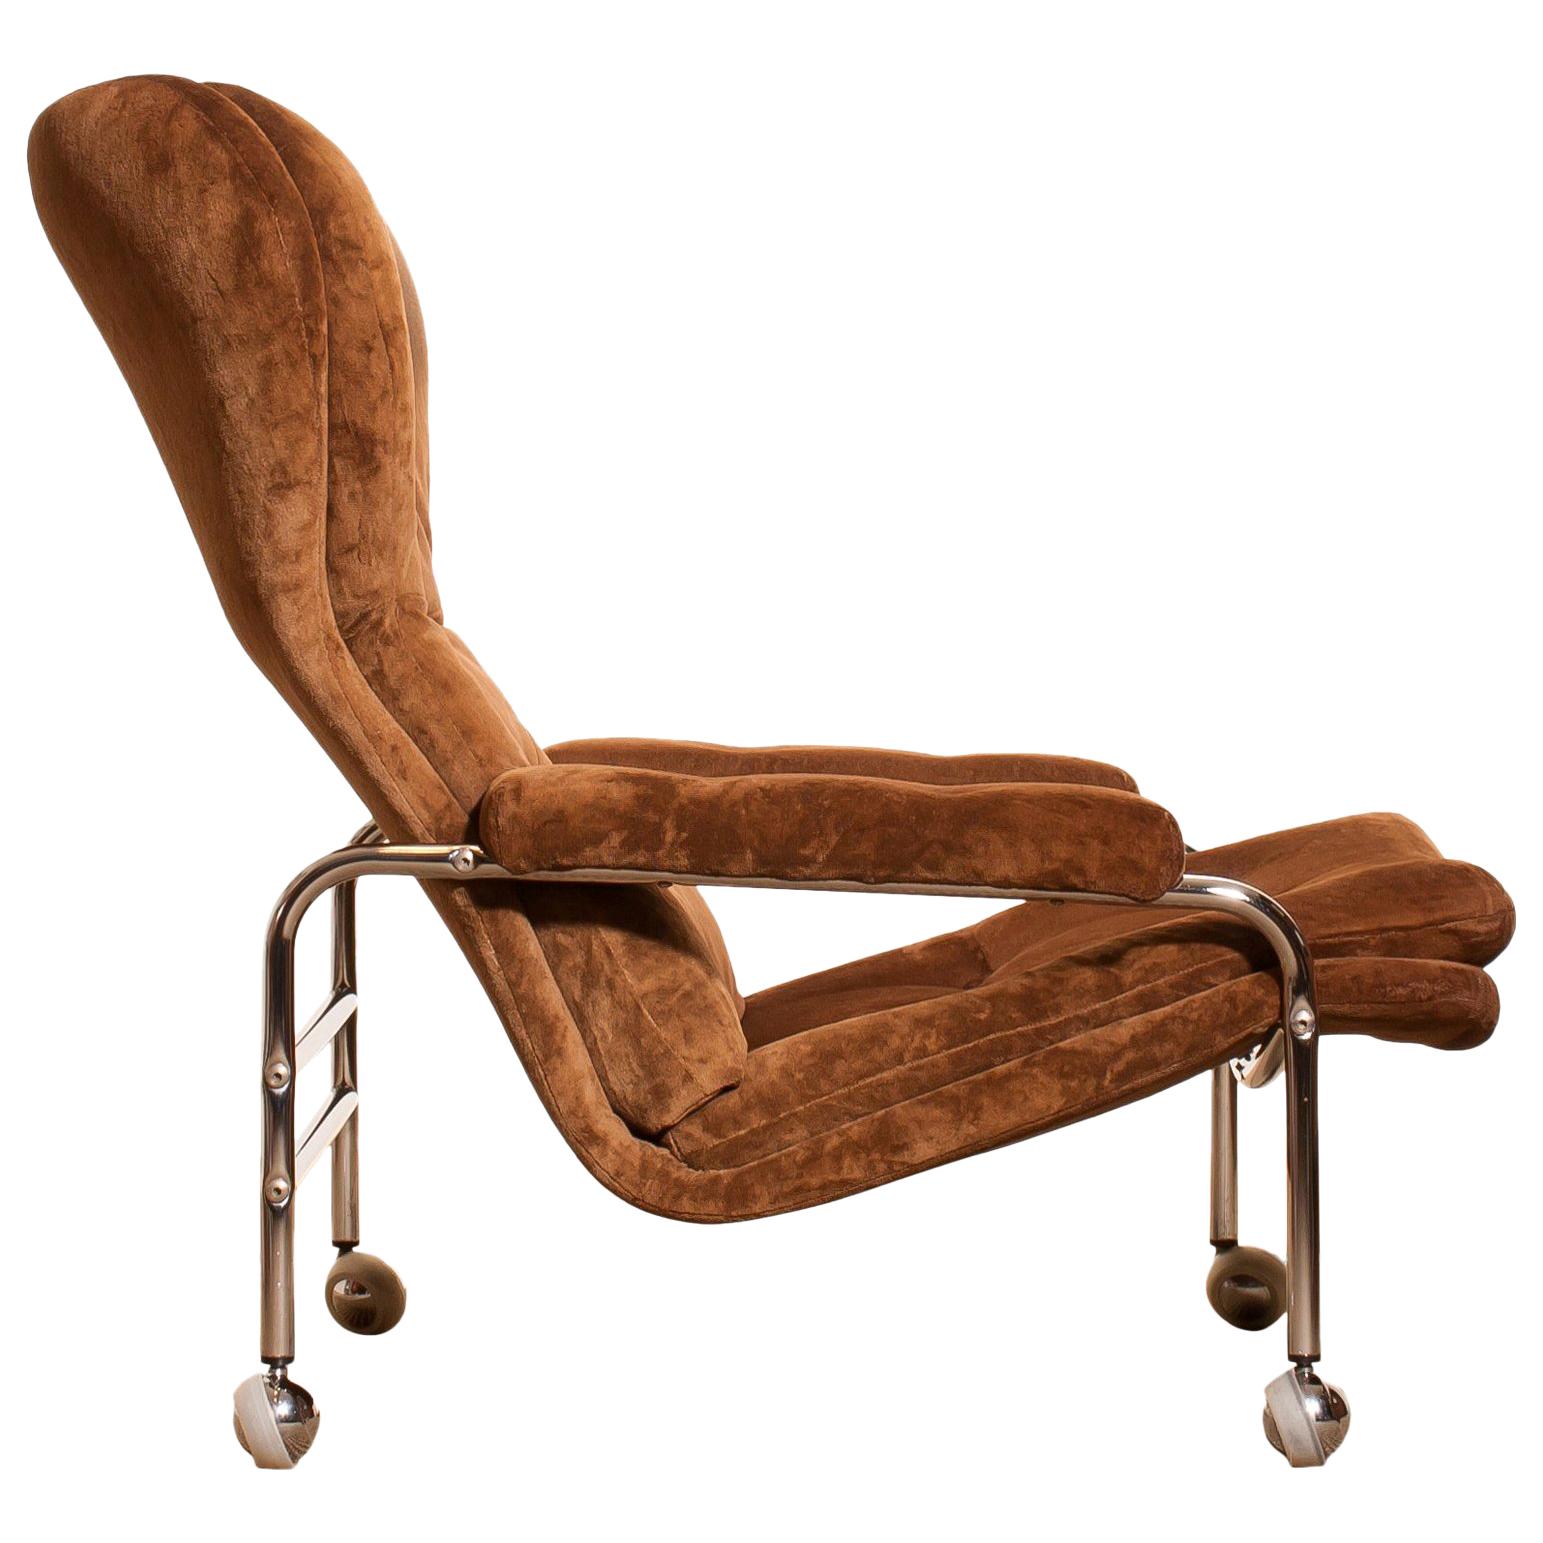 Beautiful lounge chair made by Sapa Rydaholm, Sweden.
This chair has brown velour’s seating on a chromed wheeled frame.
It is in a very nice used condition with little bald spots in the fabric.
Period 1970s.
Dimensions: H 88 cm x W 73 cm x D 104 cm